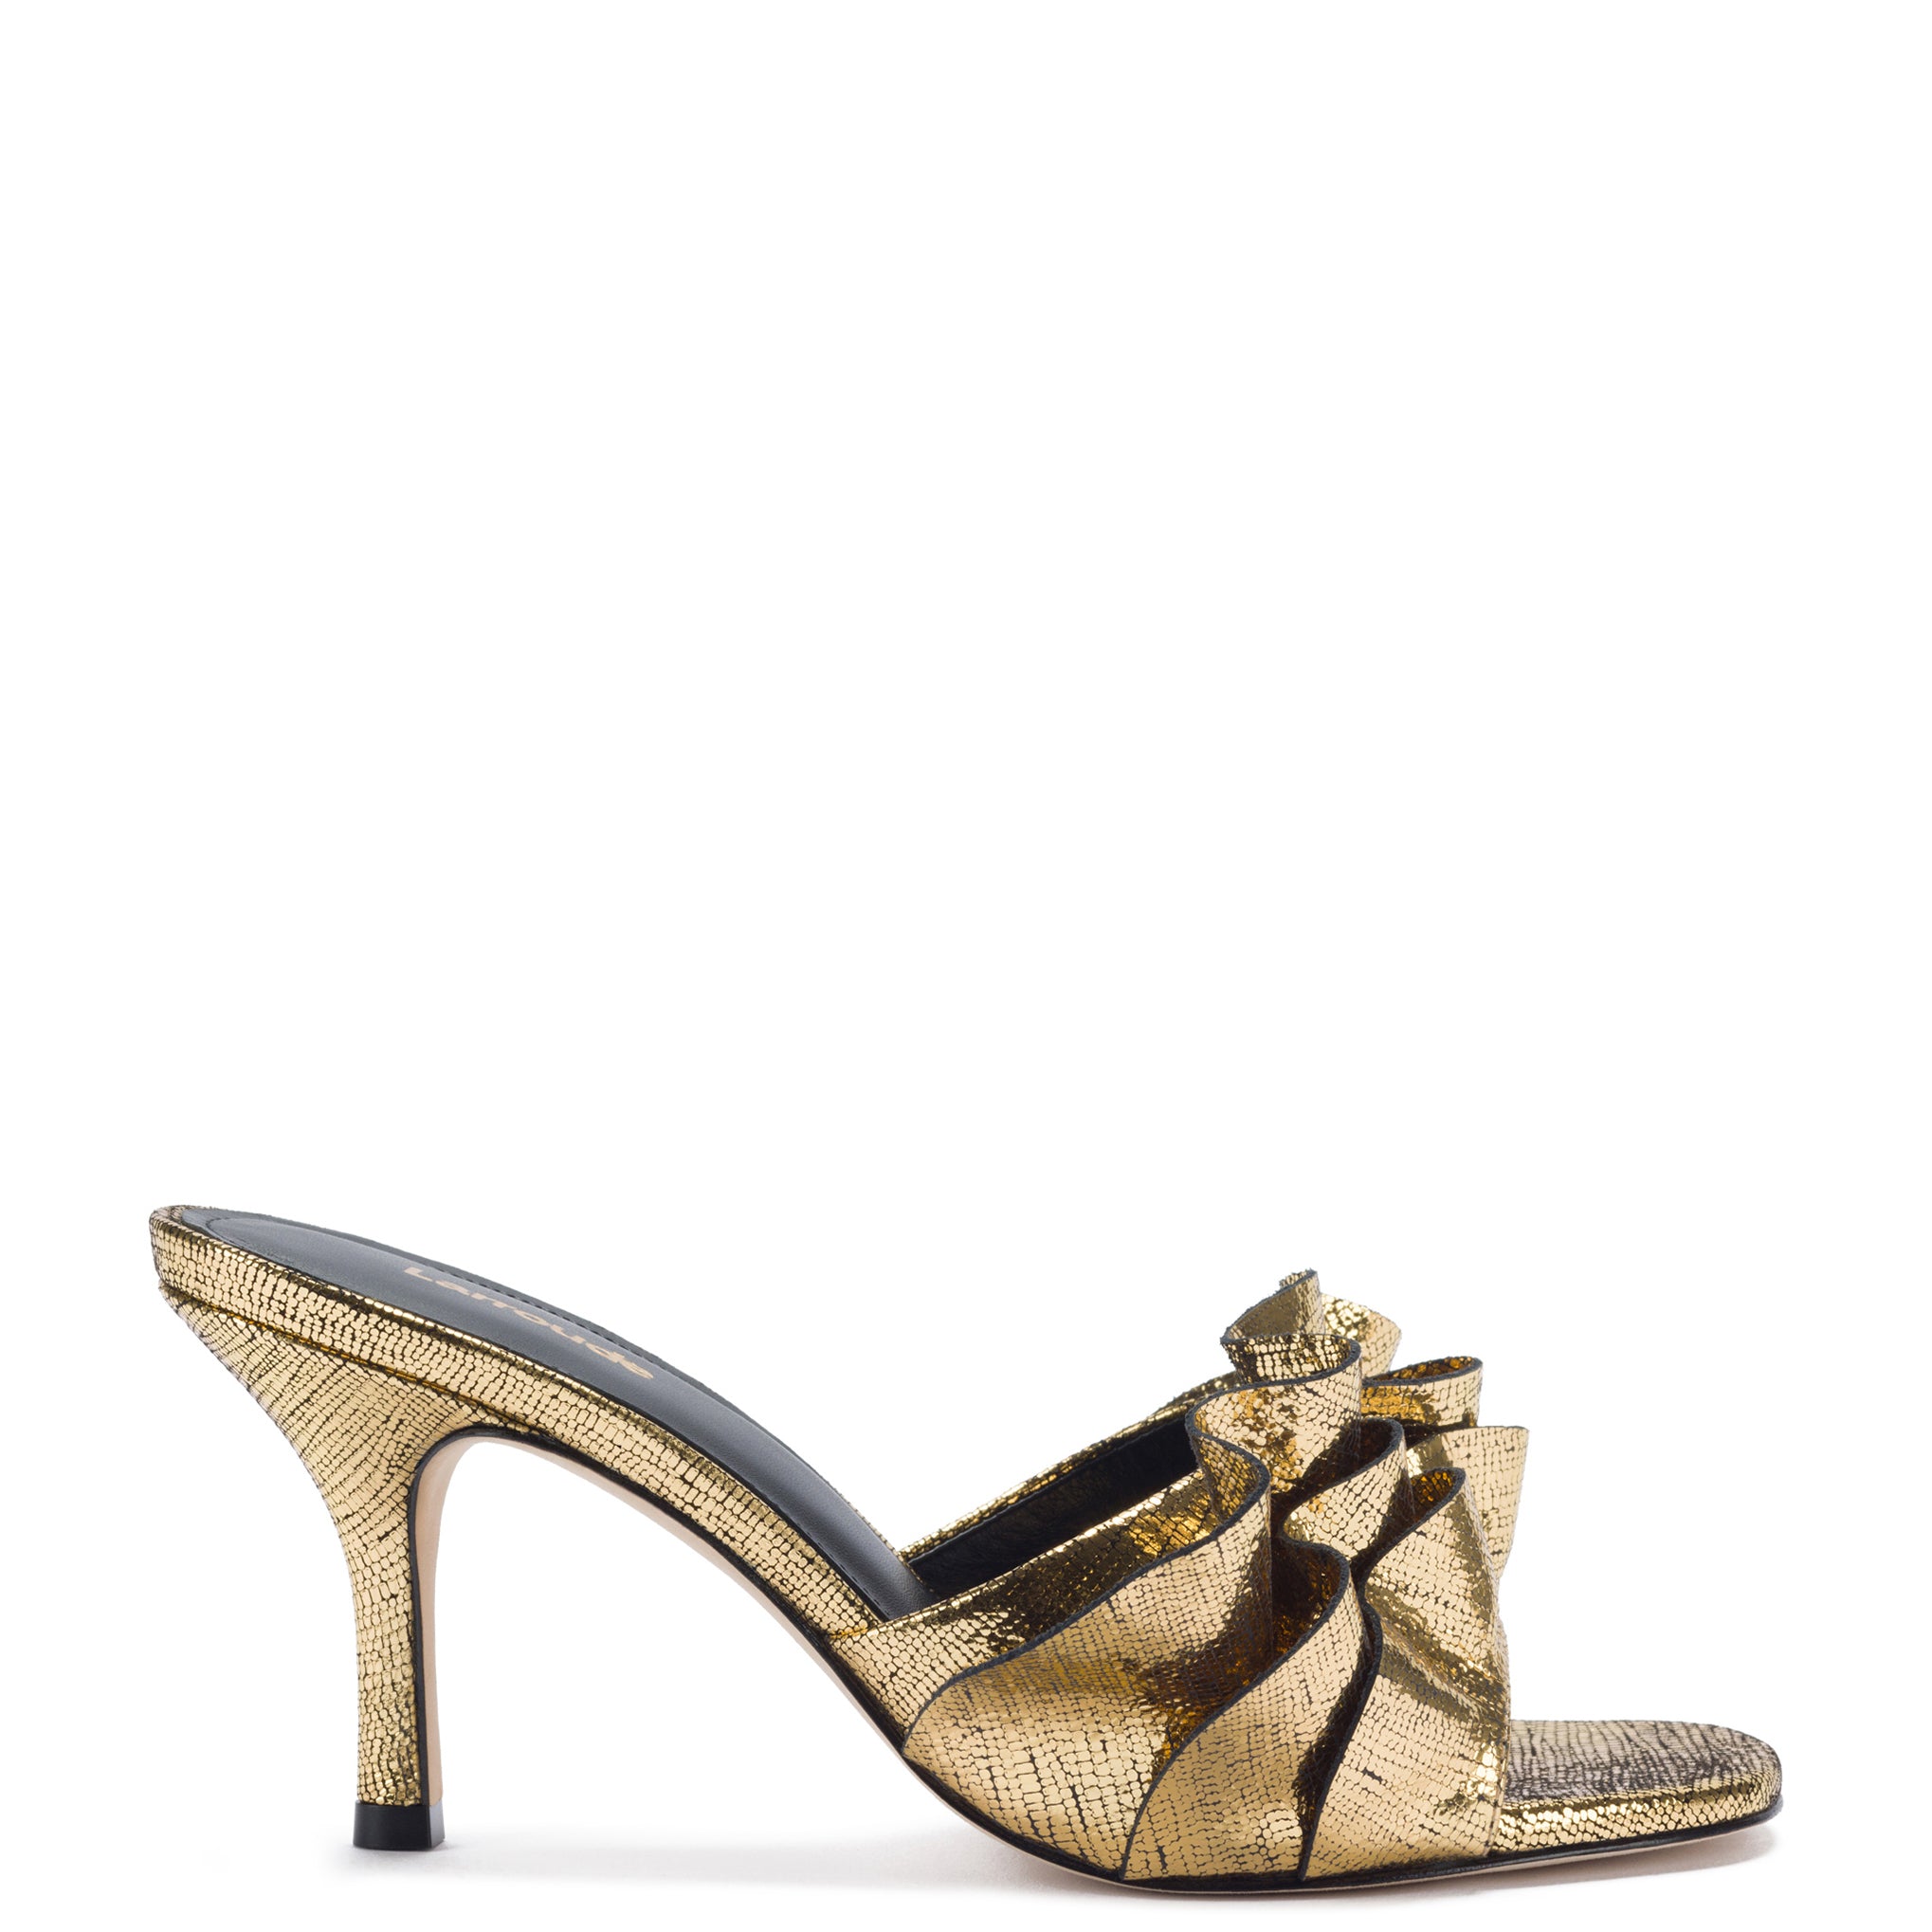 Colette Ruffle Mule In Gold Cracked Metallic Leather